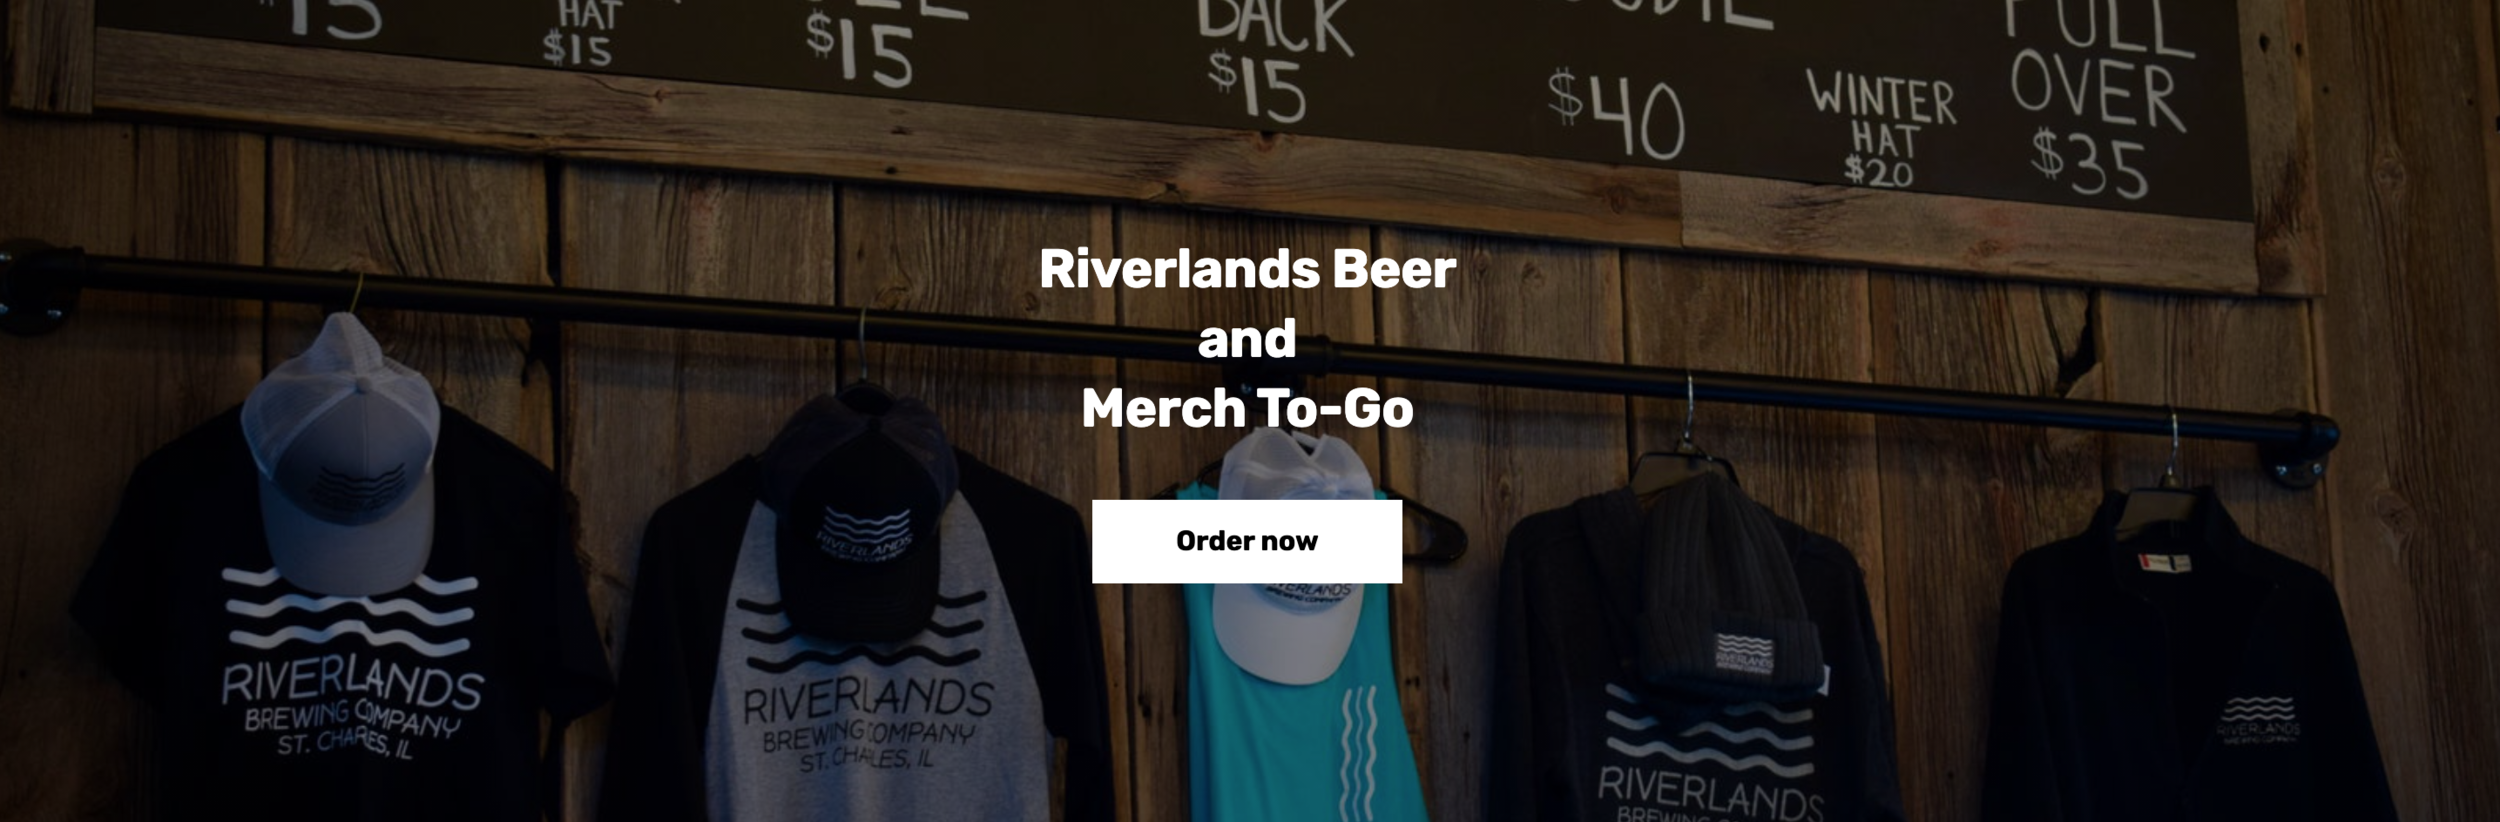 Riverlands Brewing Co.